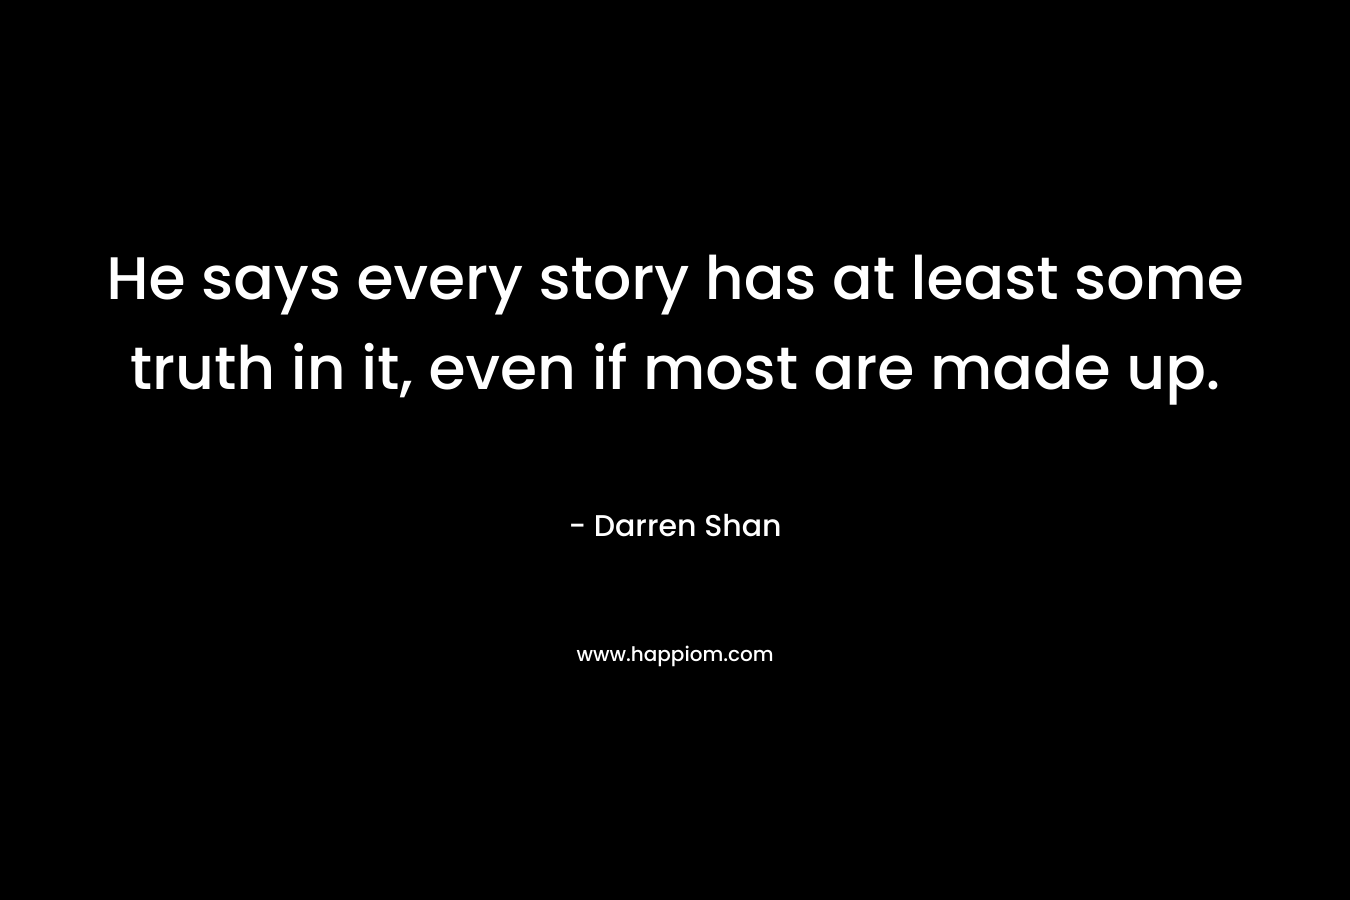 He says every story has at least some truth in it, even if most are made up. – Darren Shan